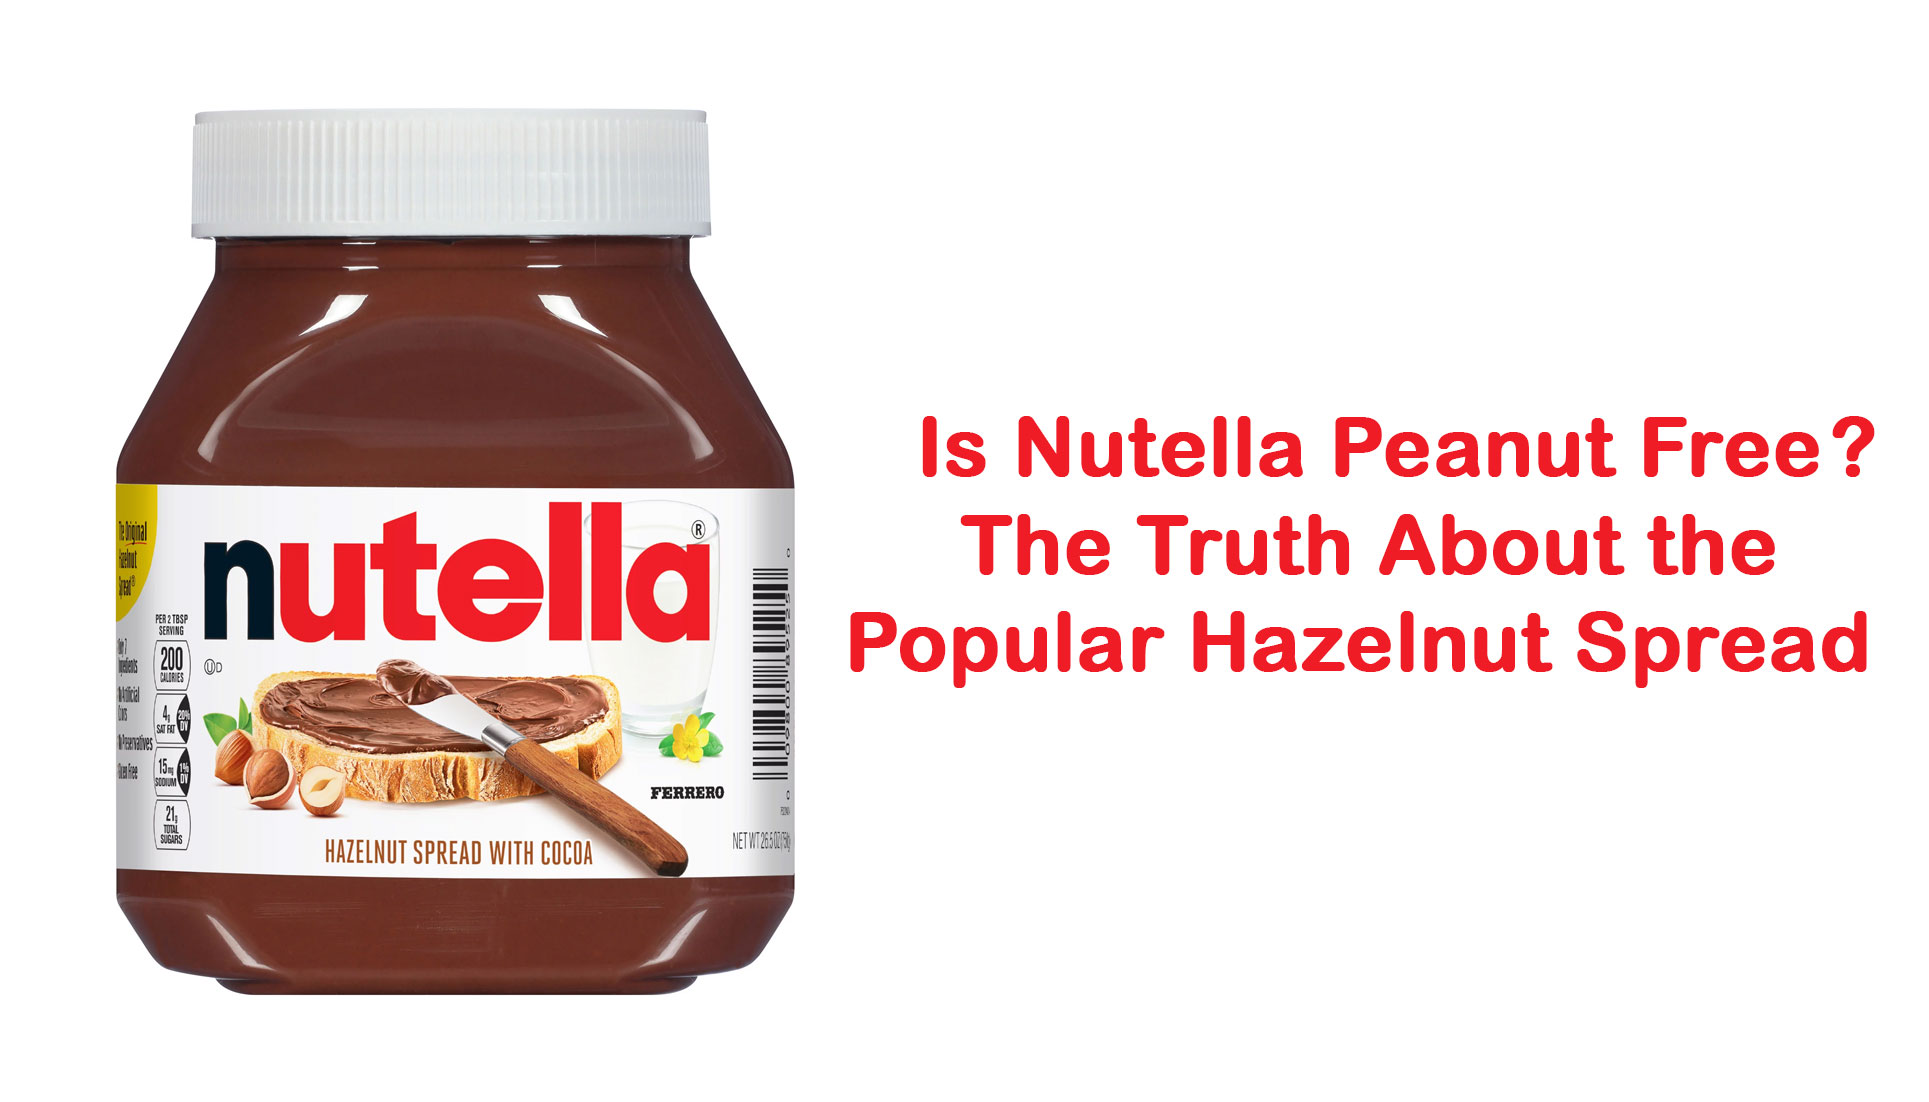 Is Nutella Peanut Free? The Truth About the Popular Hazelnut Spread